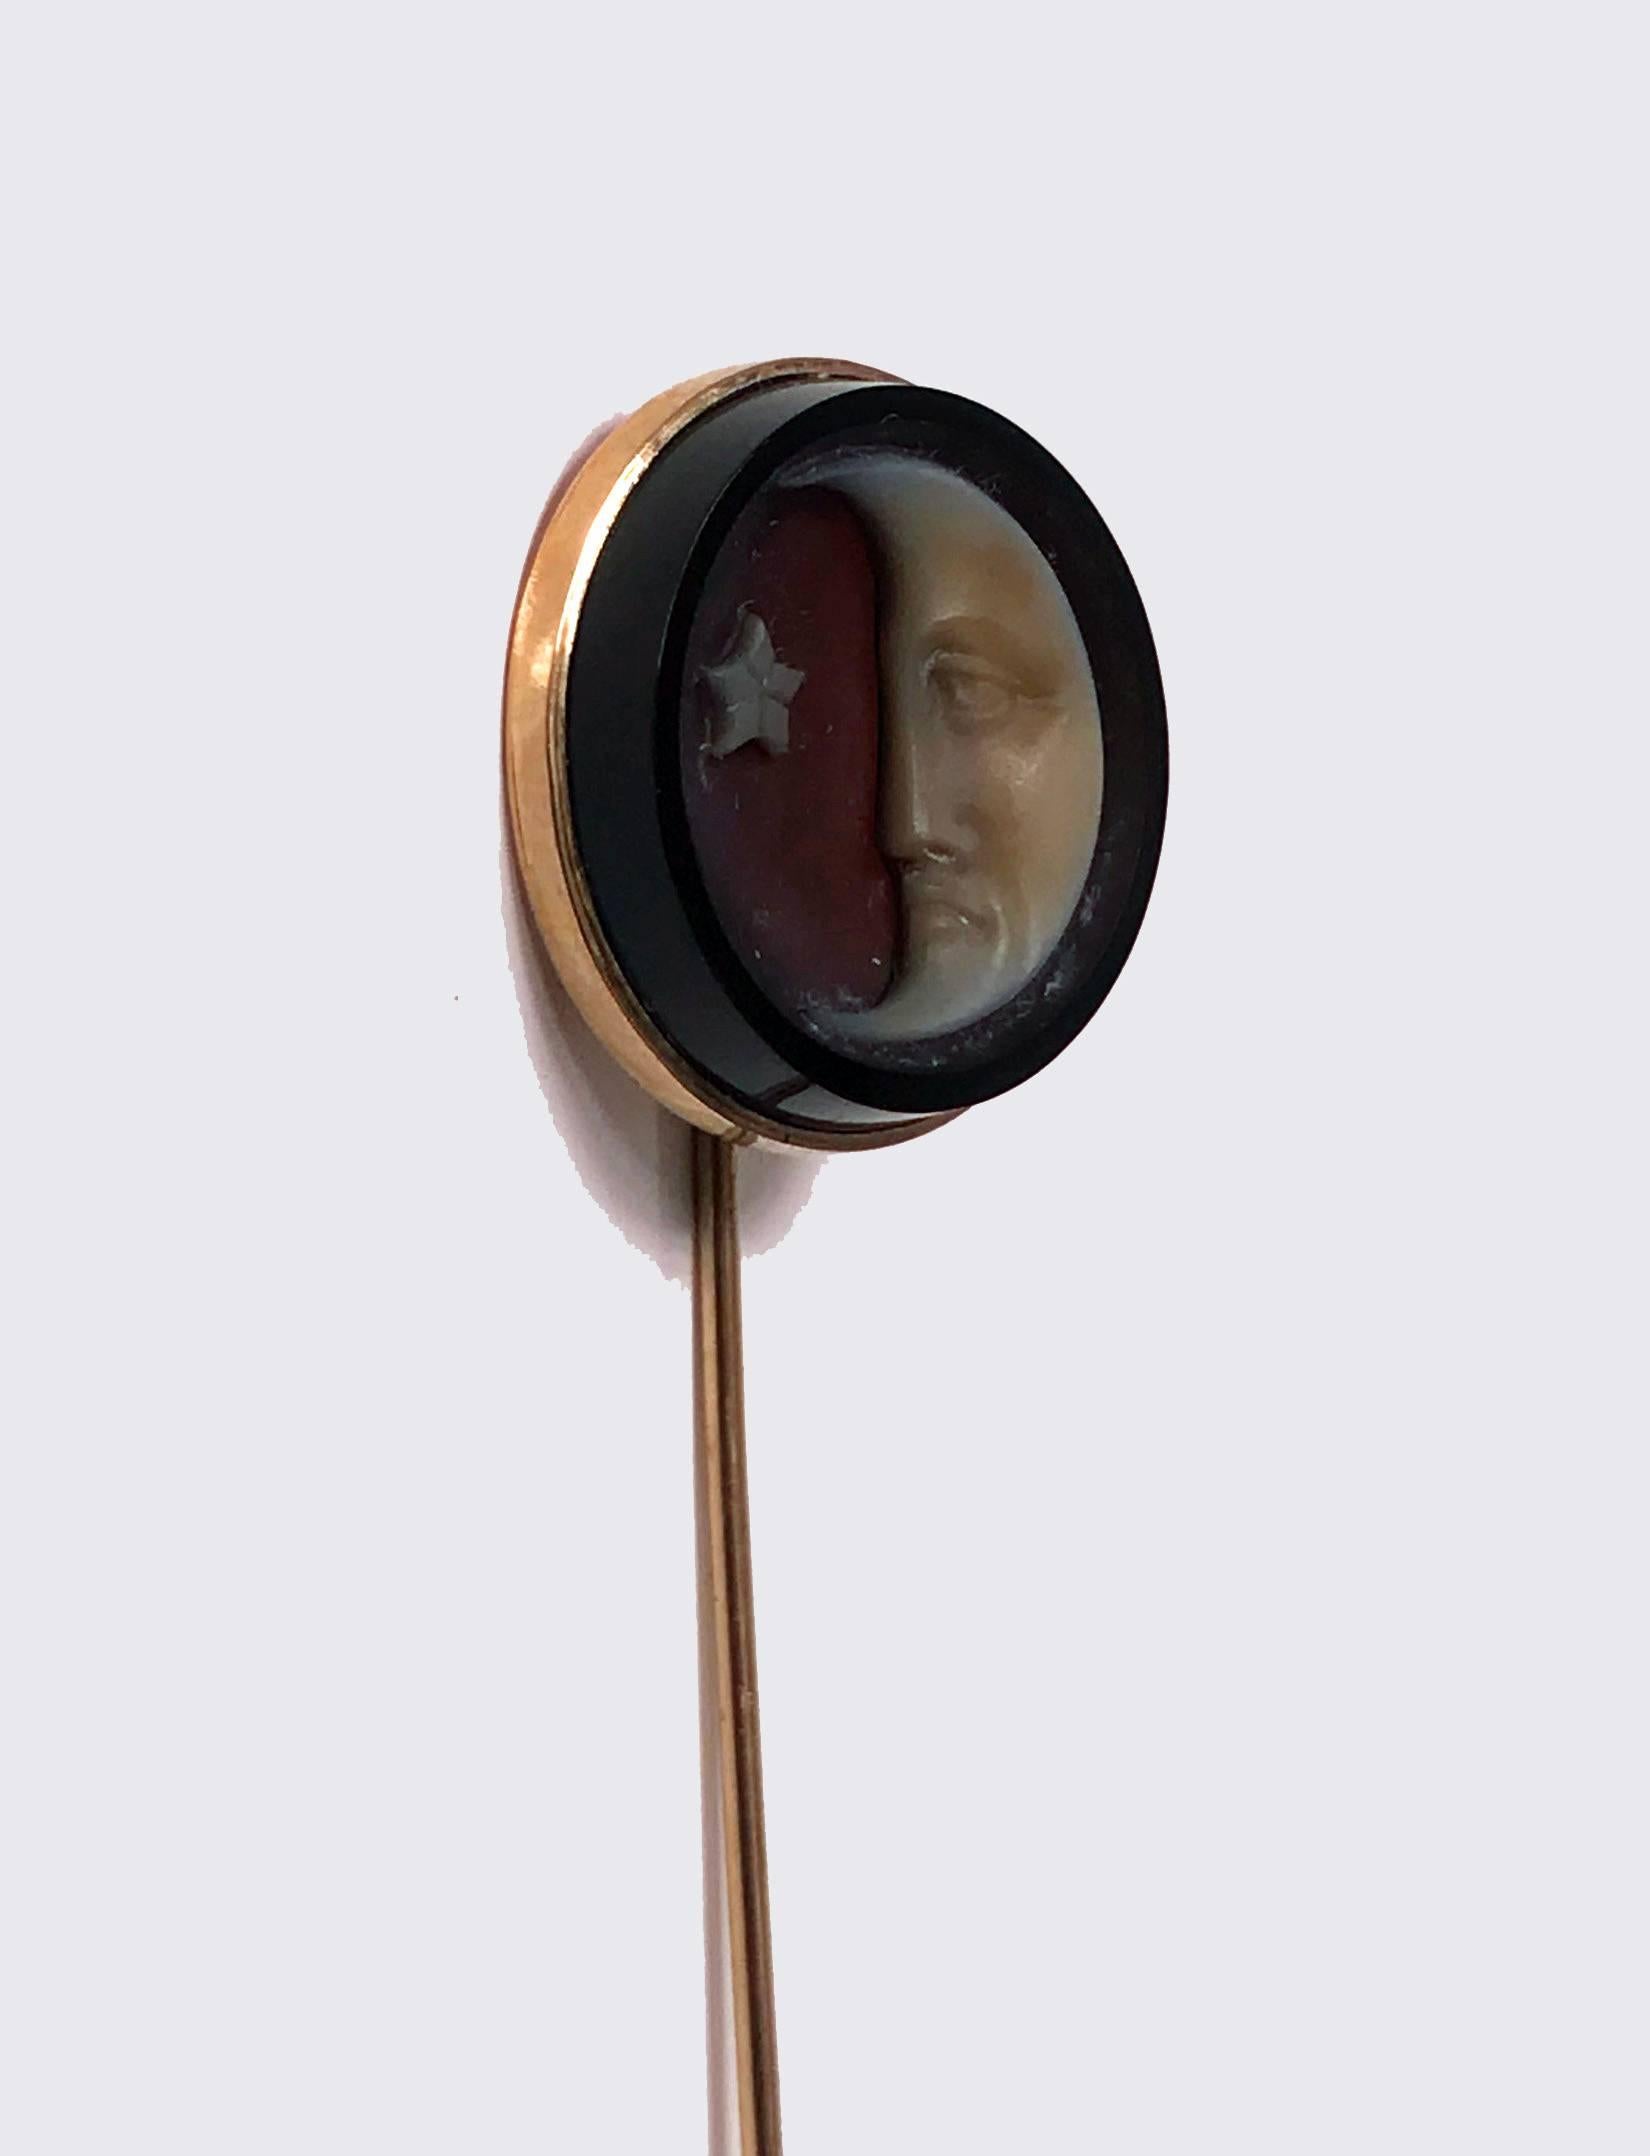 Rare Antique Gold and Onyx Cuvette Stickpin, C.1875. The stickpin, bezel set depicting the man in the moon and a star. Gold tests as 14K. Diameter of cuvette: Approximately 21.50 mm. Length of Stickpin: 2.25 inches. Ref: Skinners Fine Jewelry